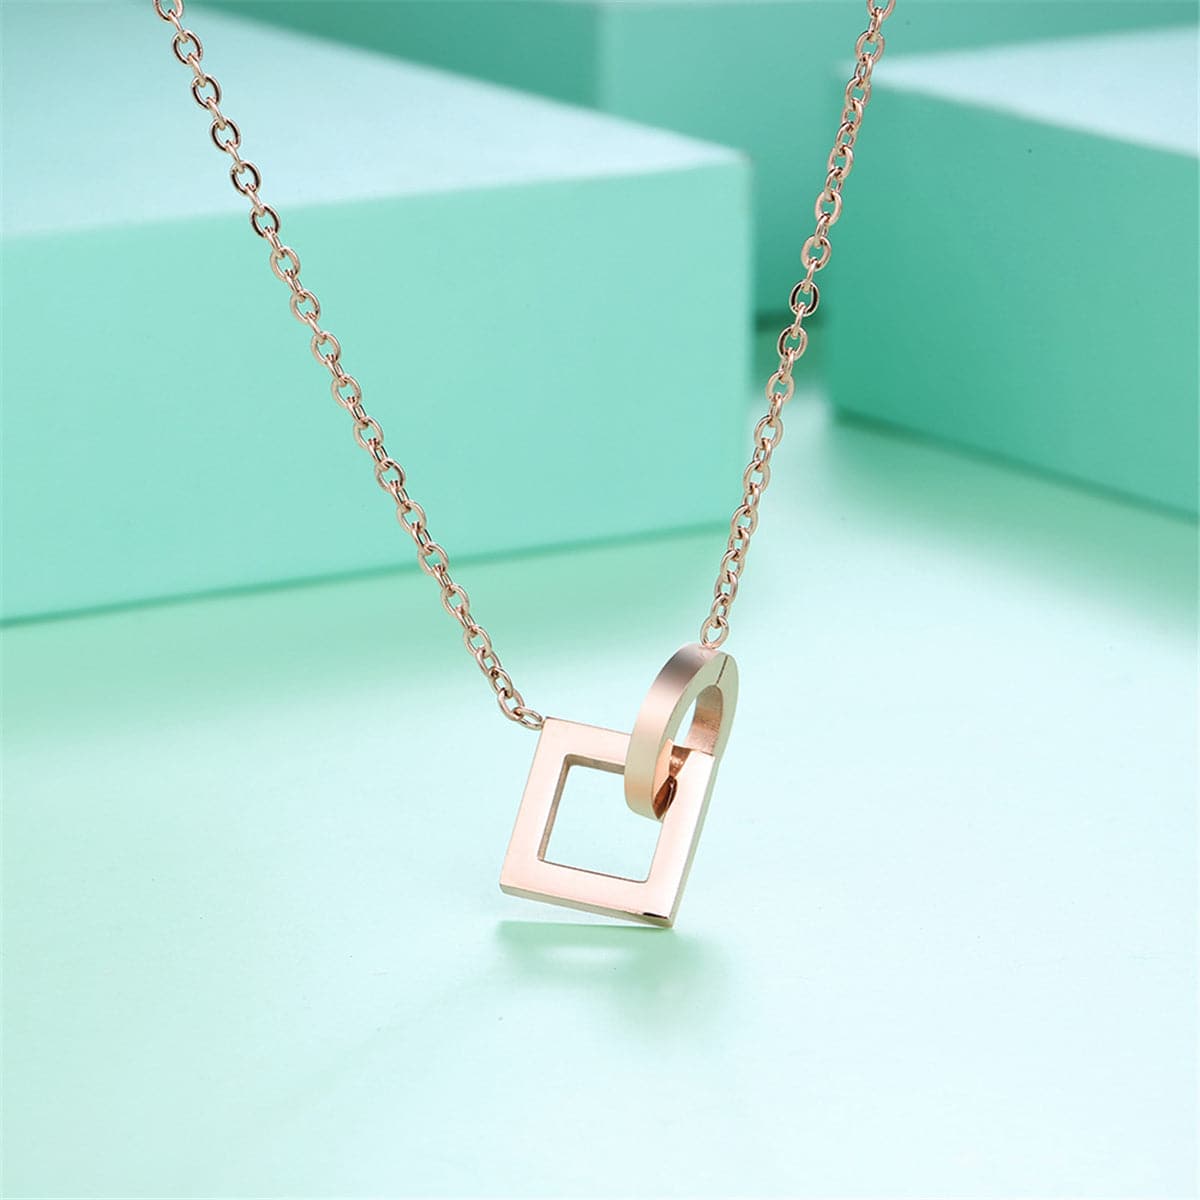 18K Rose Gold-Plated Open Square & Circle Pendant Necklace